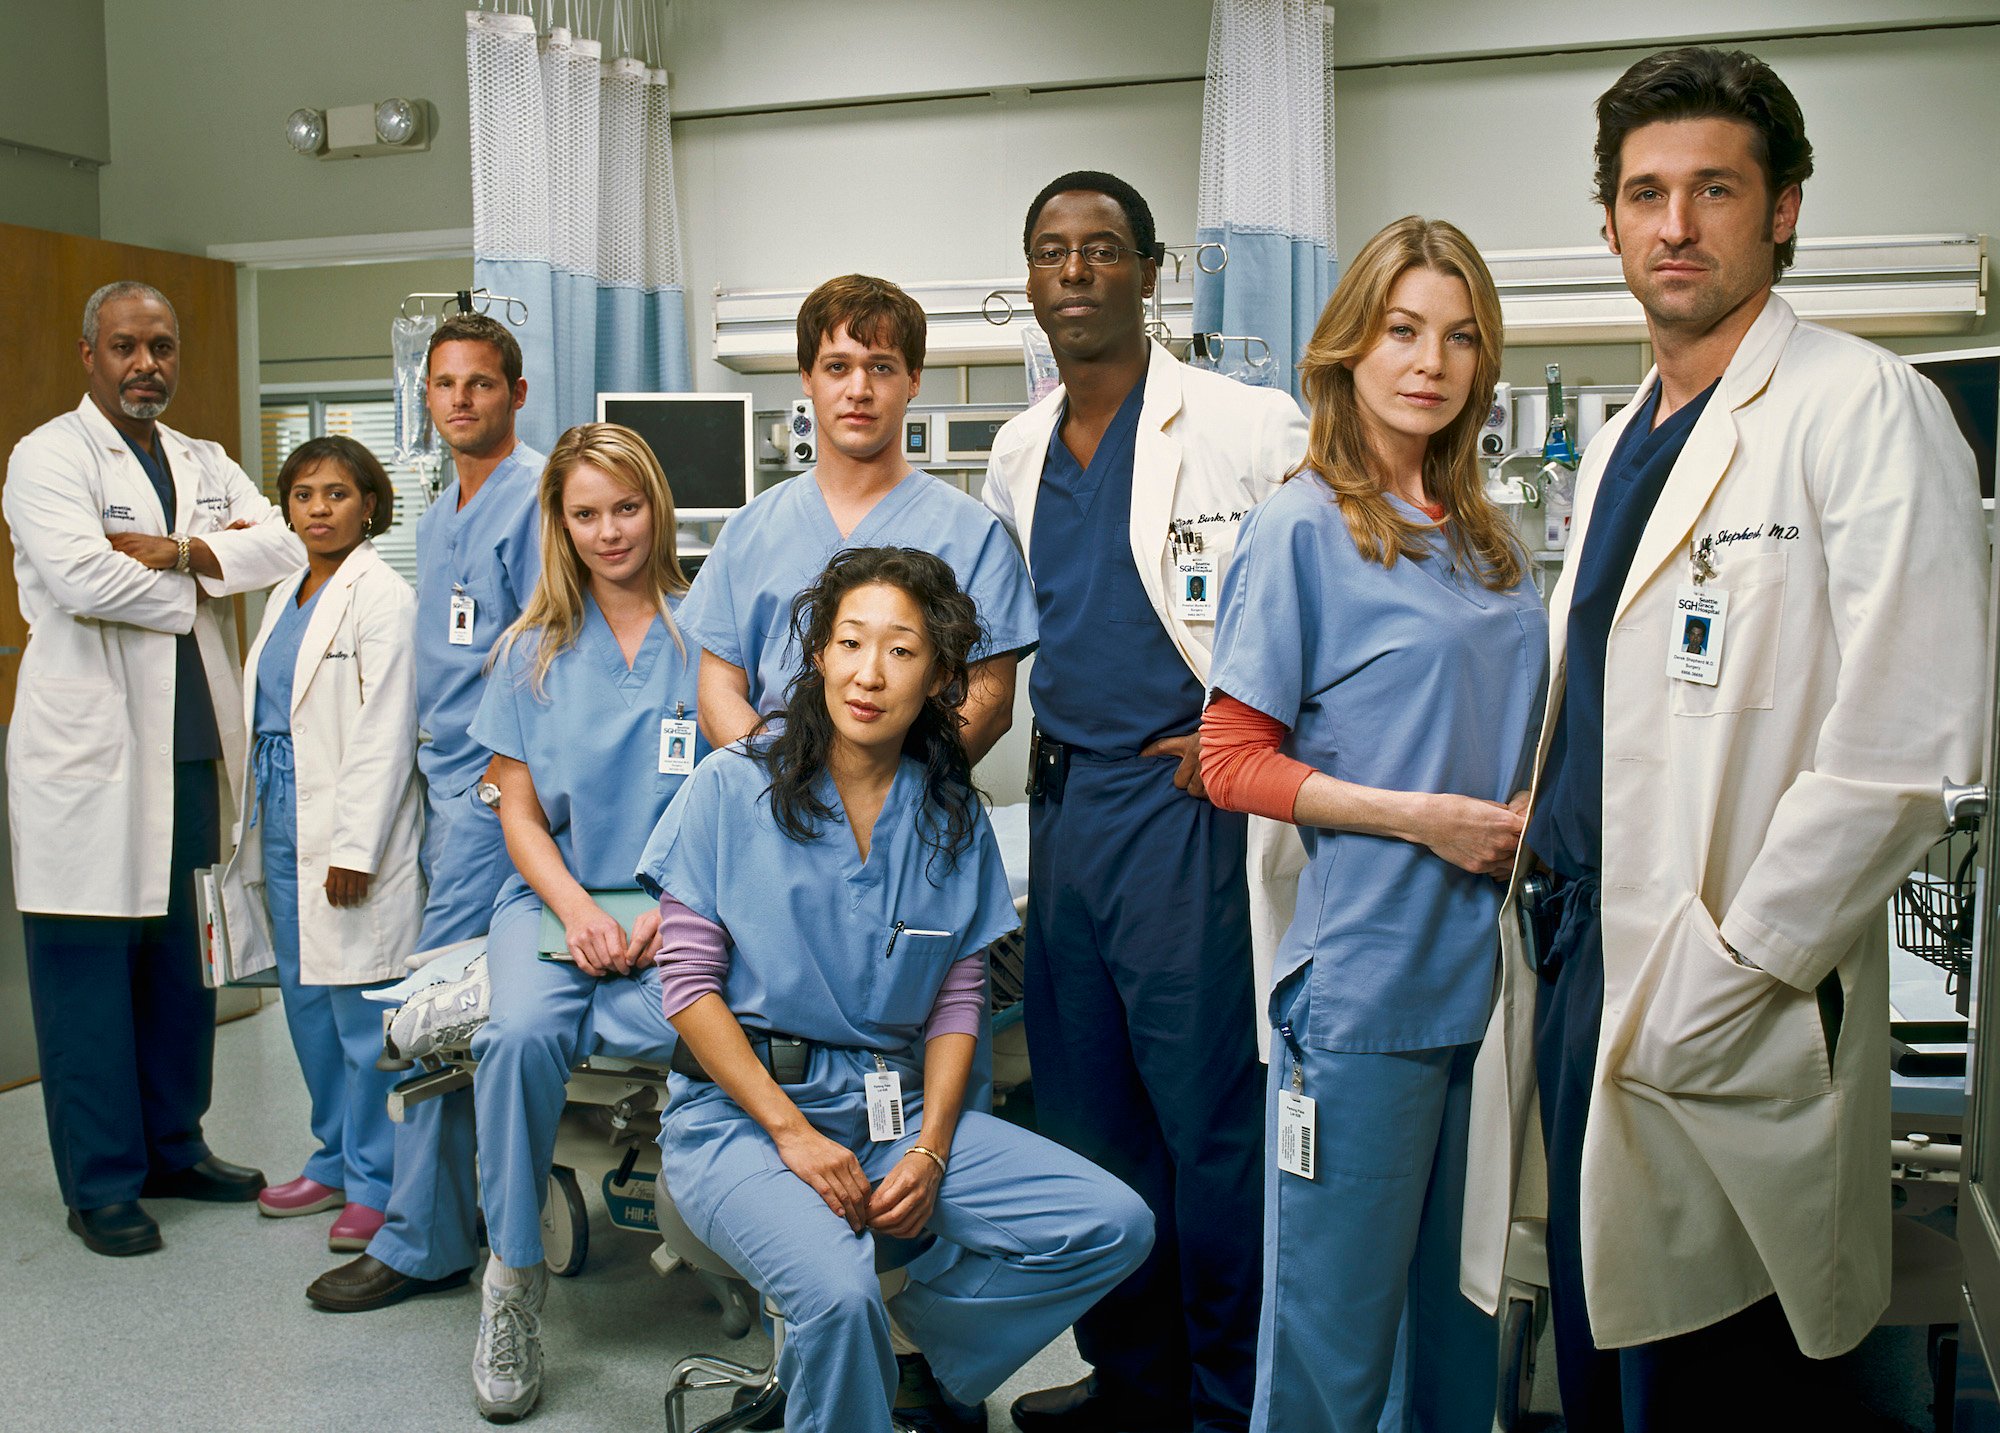 The 'Grey's Anatomy' cast is wearing white and blue scrubs.